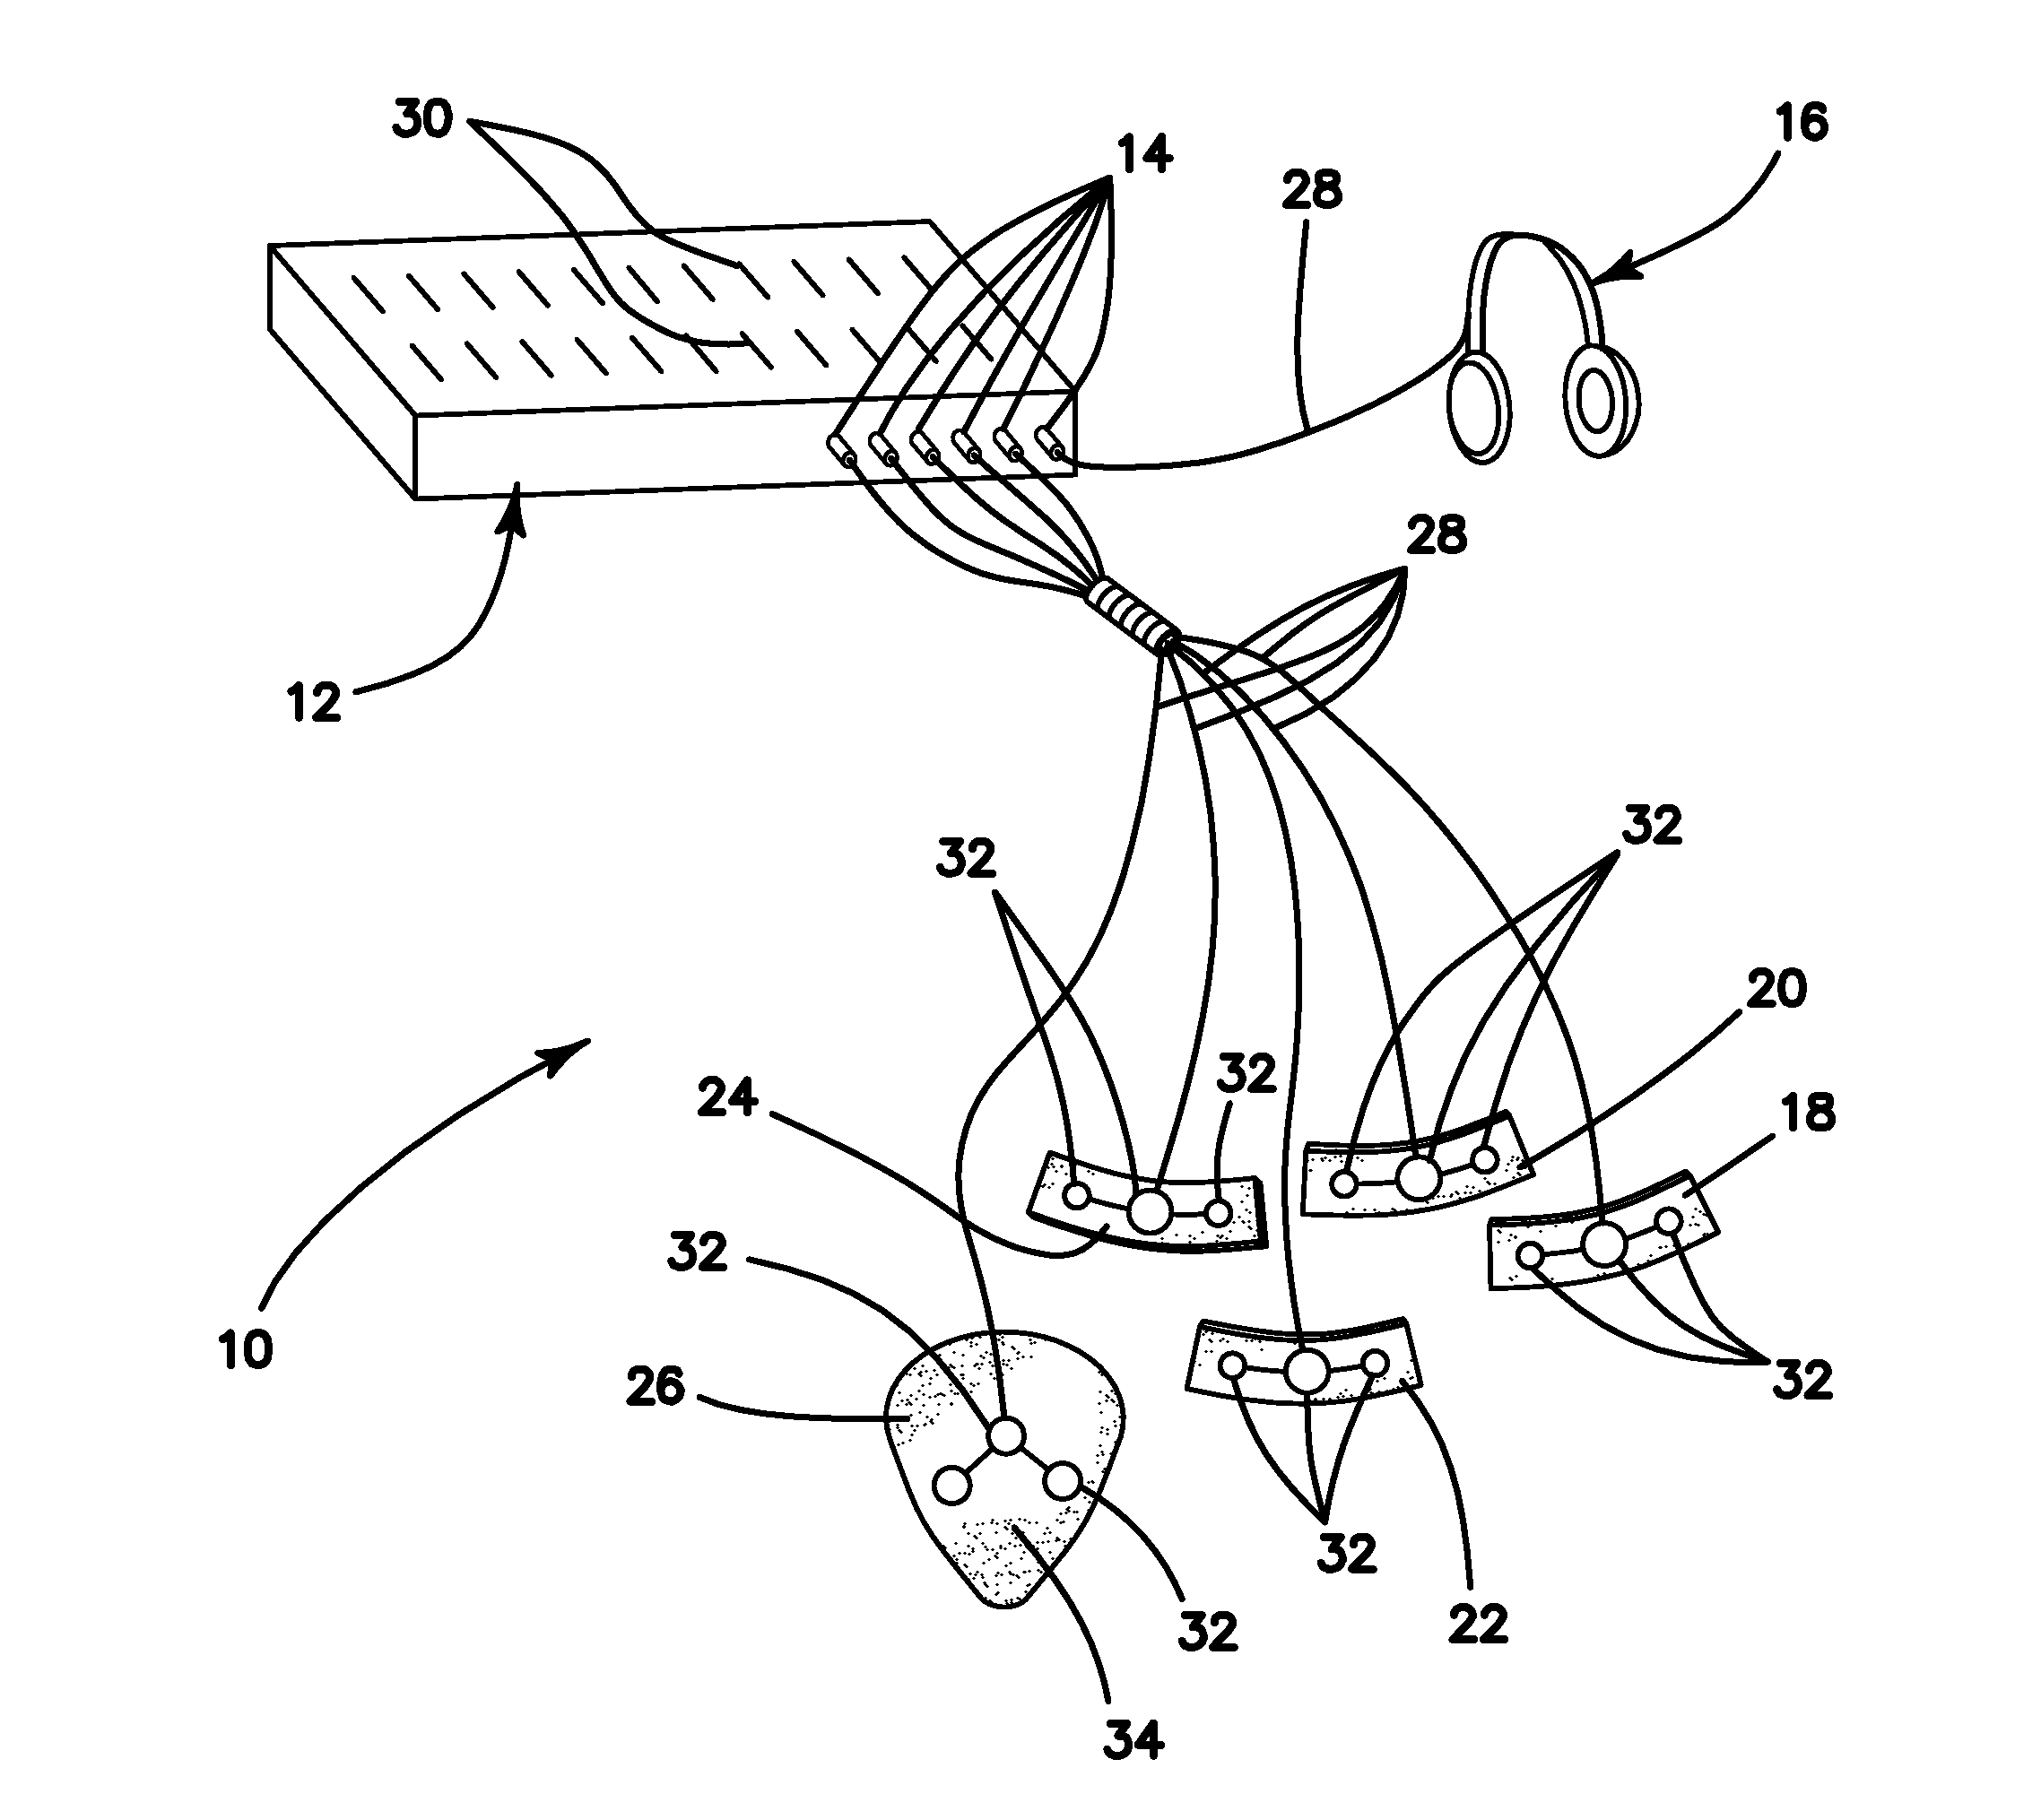 Sound therapy systems and methods for recalibrating the body's electromagnetic field